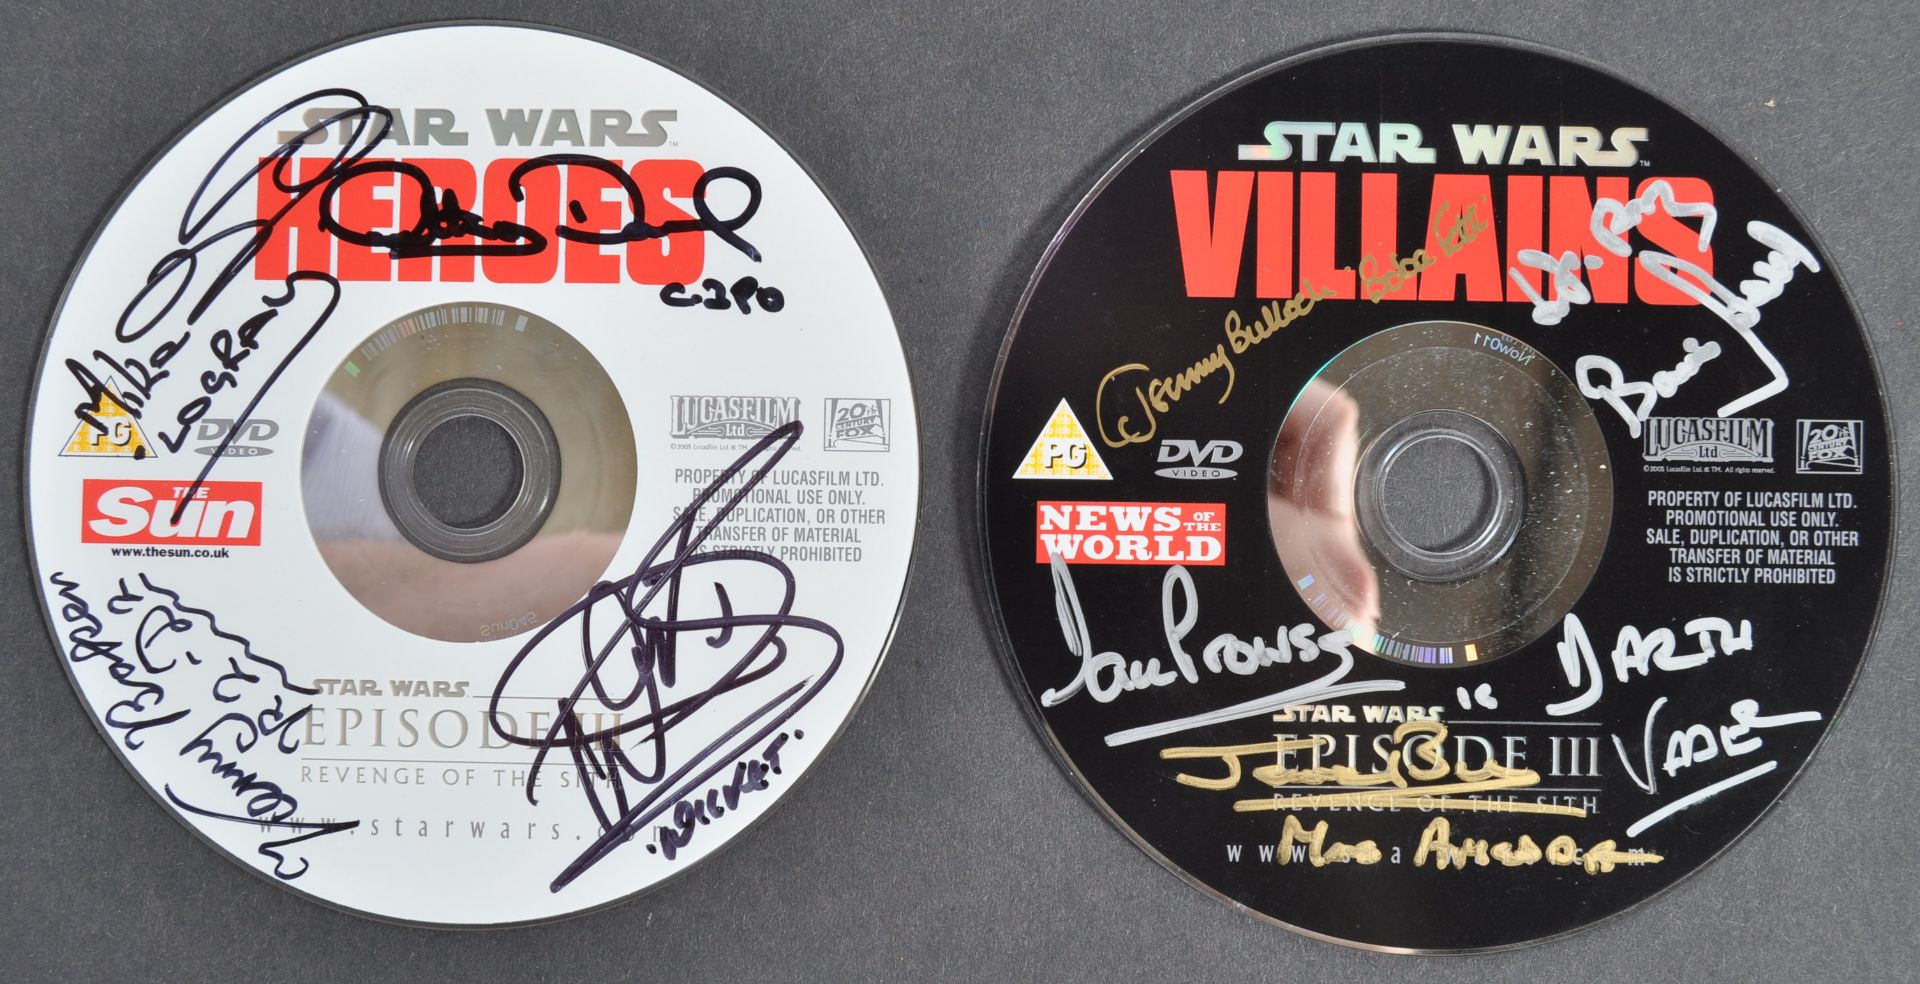 STAR WARS RARE MULTI-SIGNED DVD SET - SIGNED BY 8 CAST